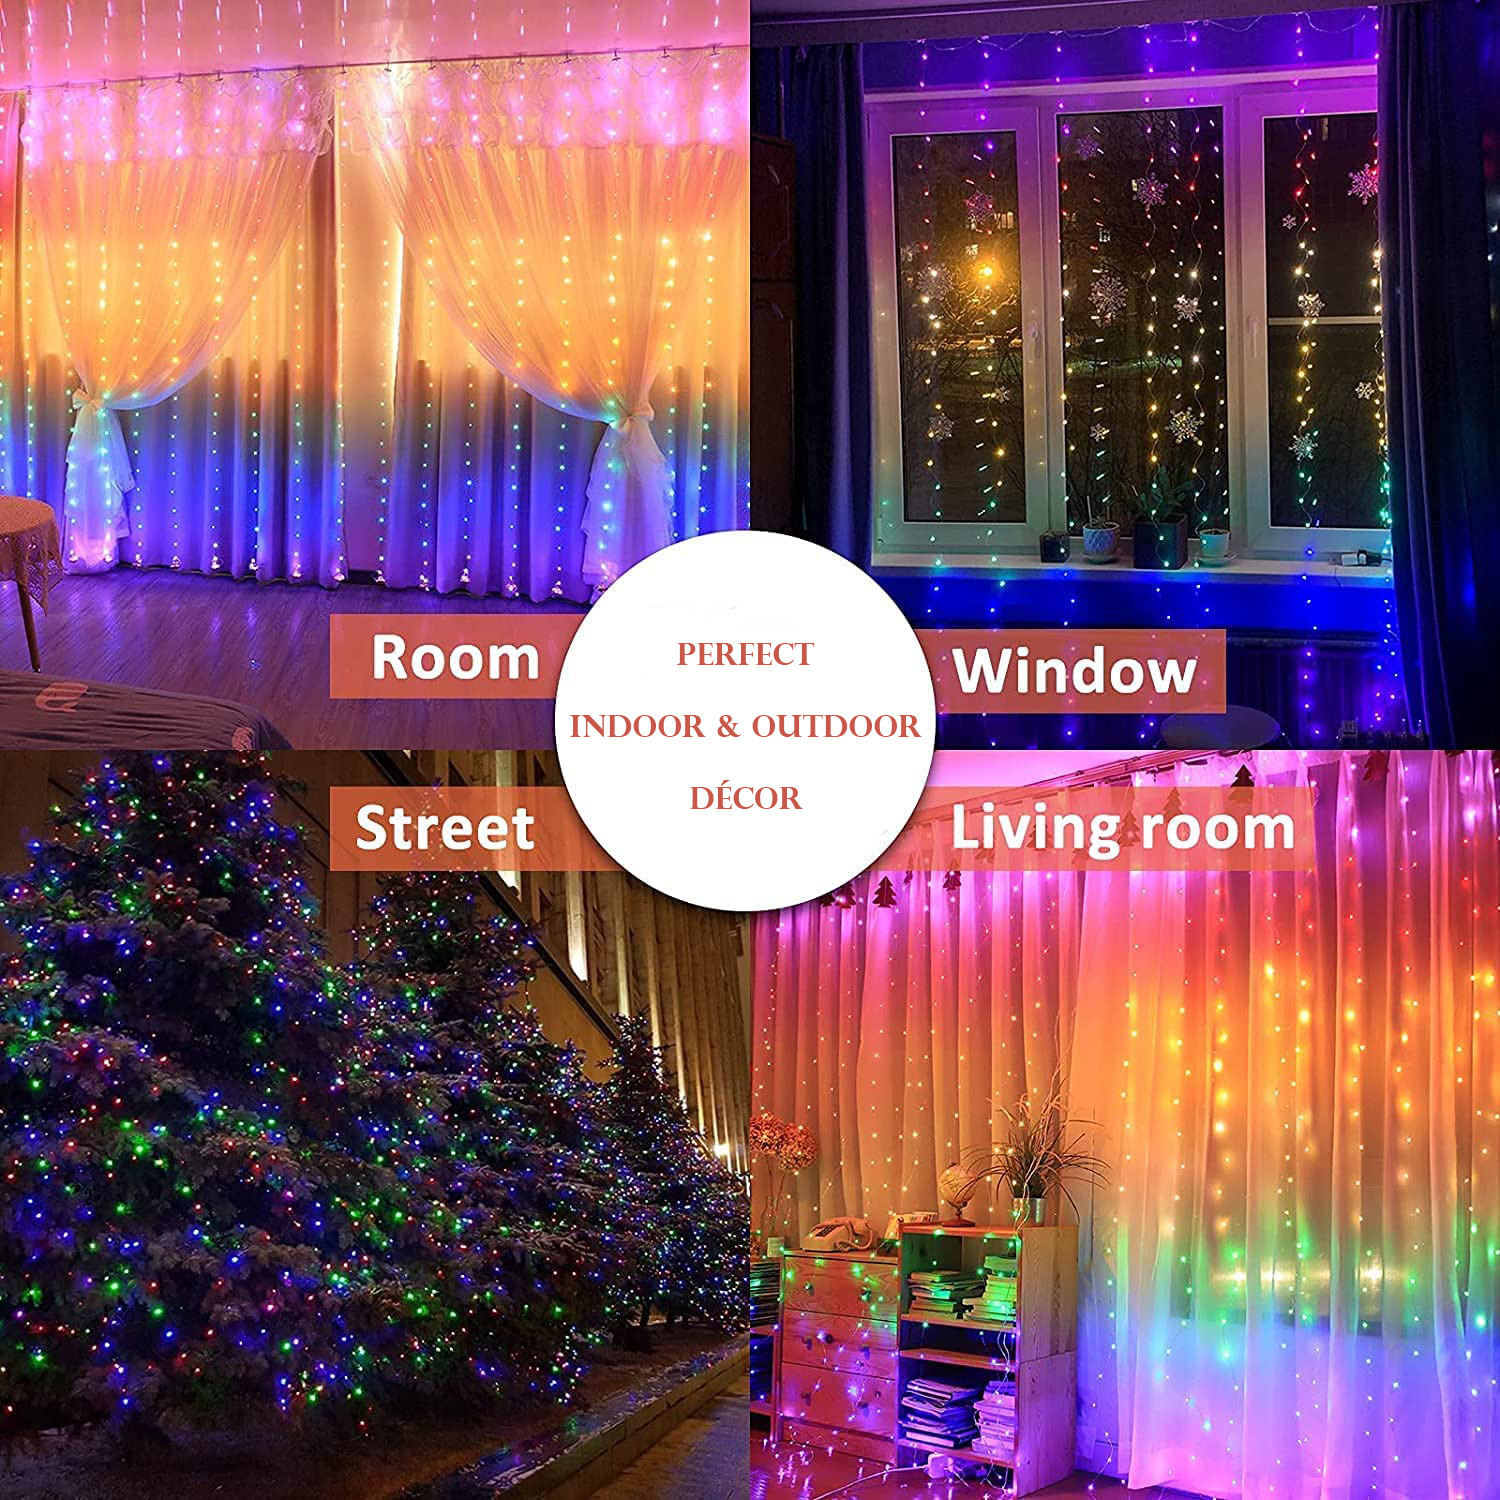 Kuber Industries Curtain Lights with 300 LED | 10 Strings Jharna Lights for Diwali | Christmas | Home Decoration |Indoor & Outdoor Décor | Warm White